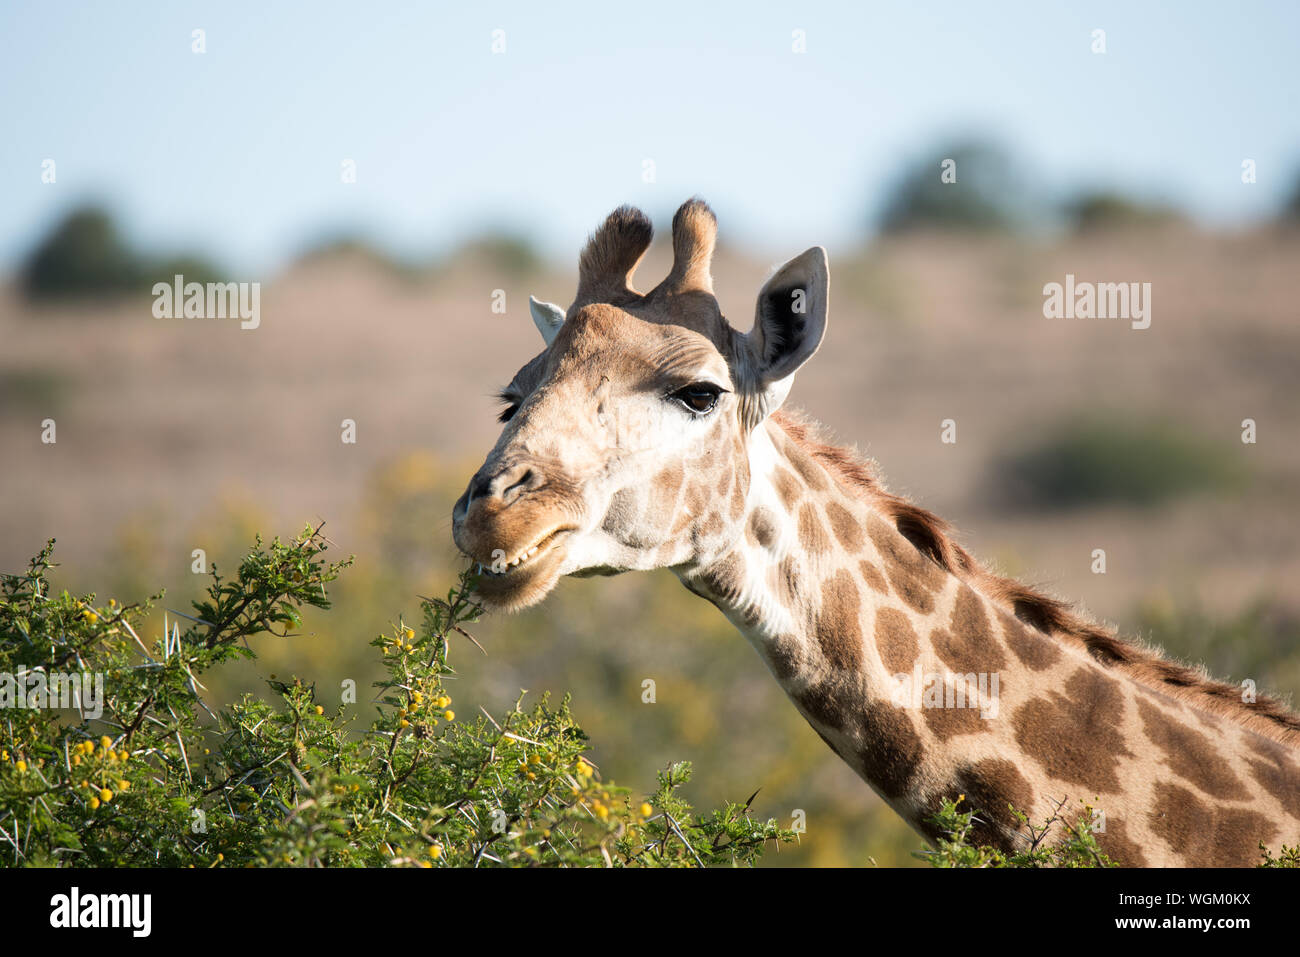 Close-up Of Giraffe Eating From Plant Stock Photo